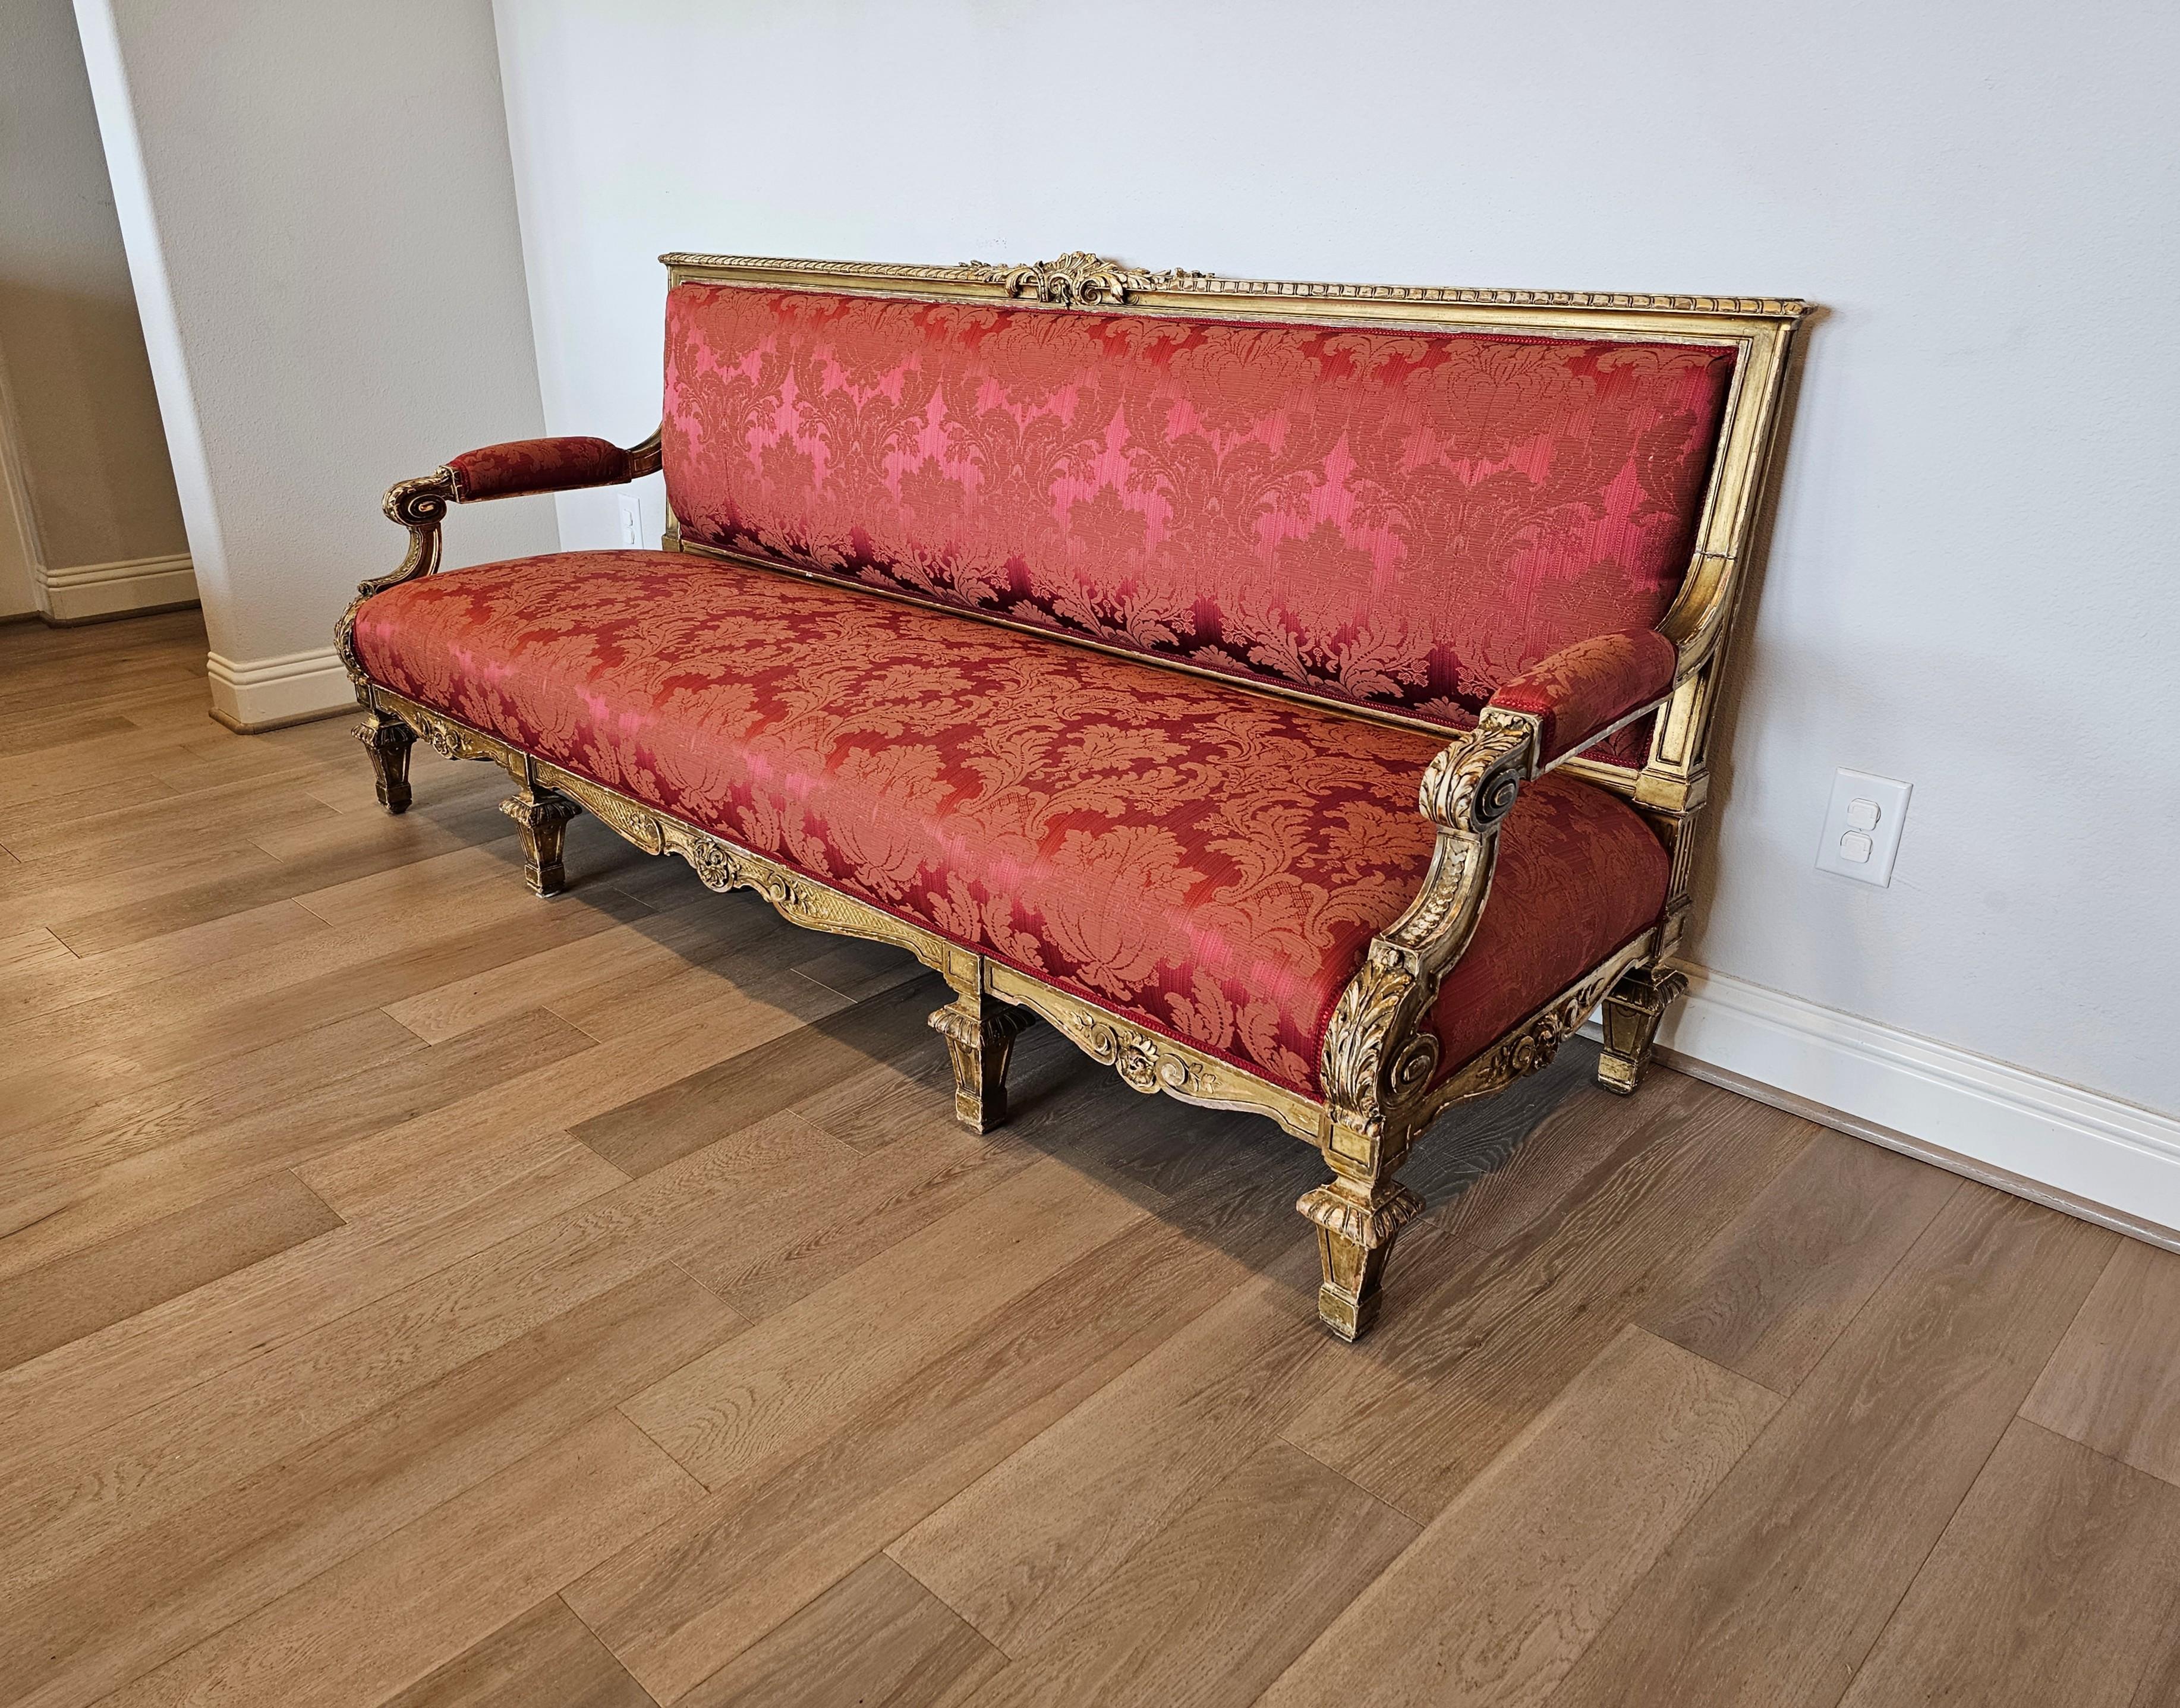 Antique French Louis XVI Style Giltwood Damask Upholstered Long Sofa Set In Good Condition For Sale In Forney, TX